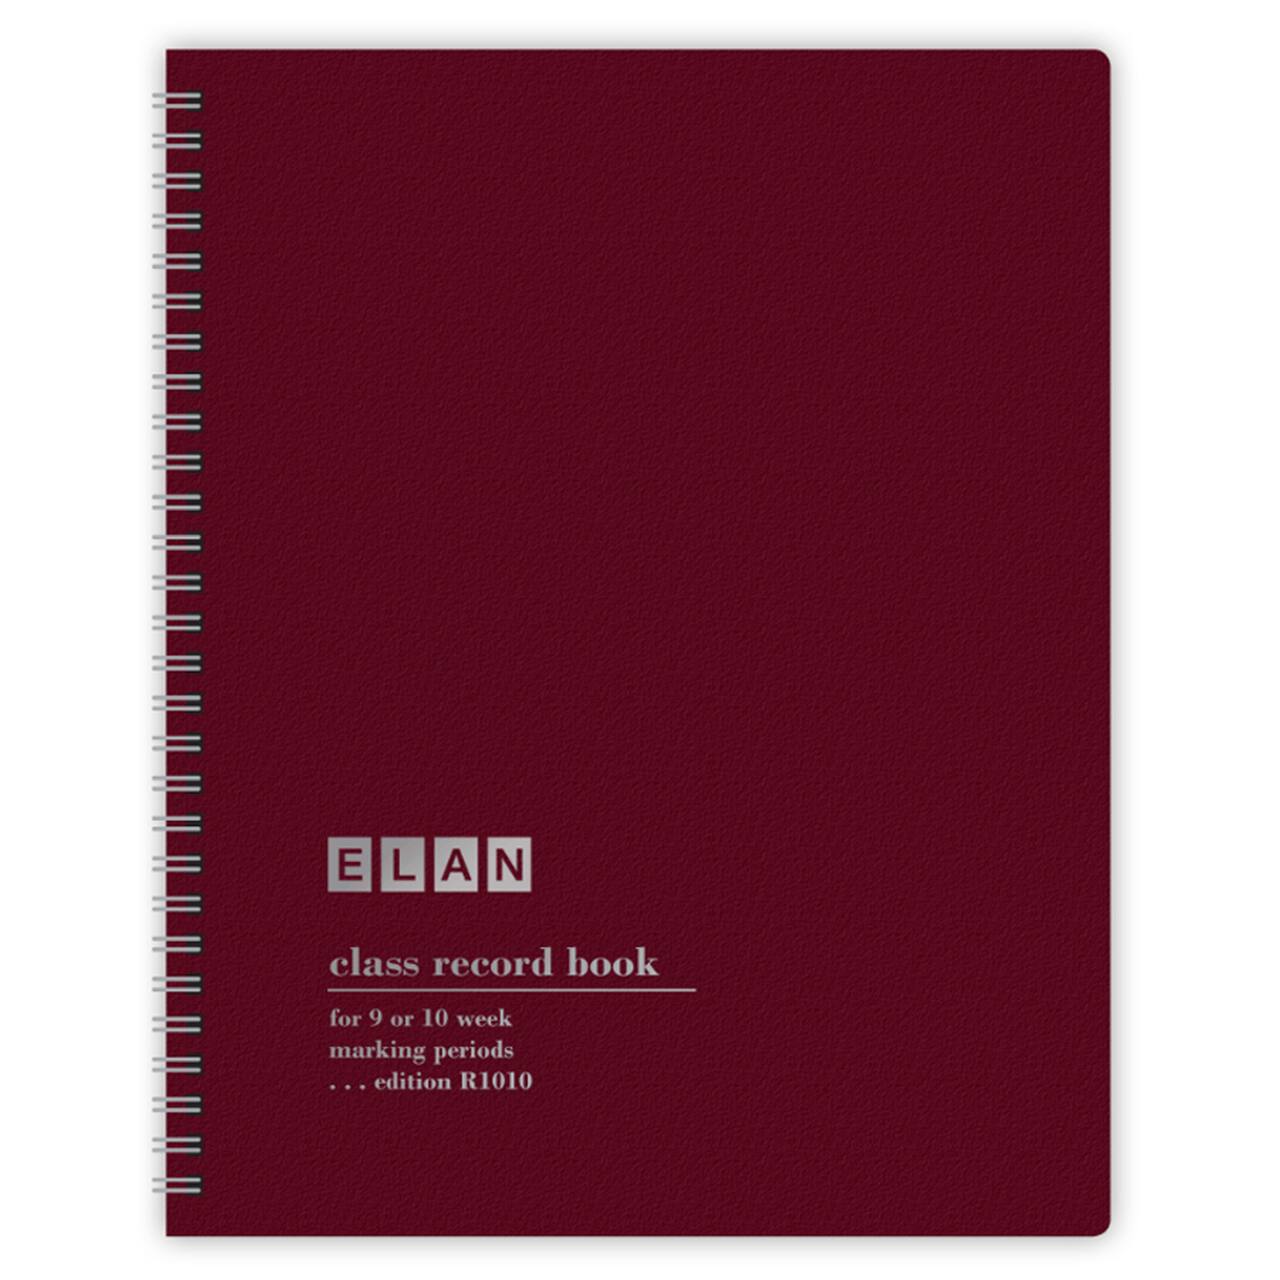 50 Student Names Class Record Book, 9-10 Weeks, Pack of 4